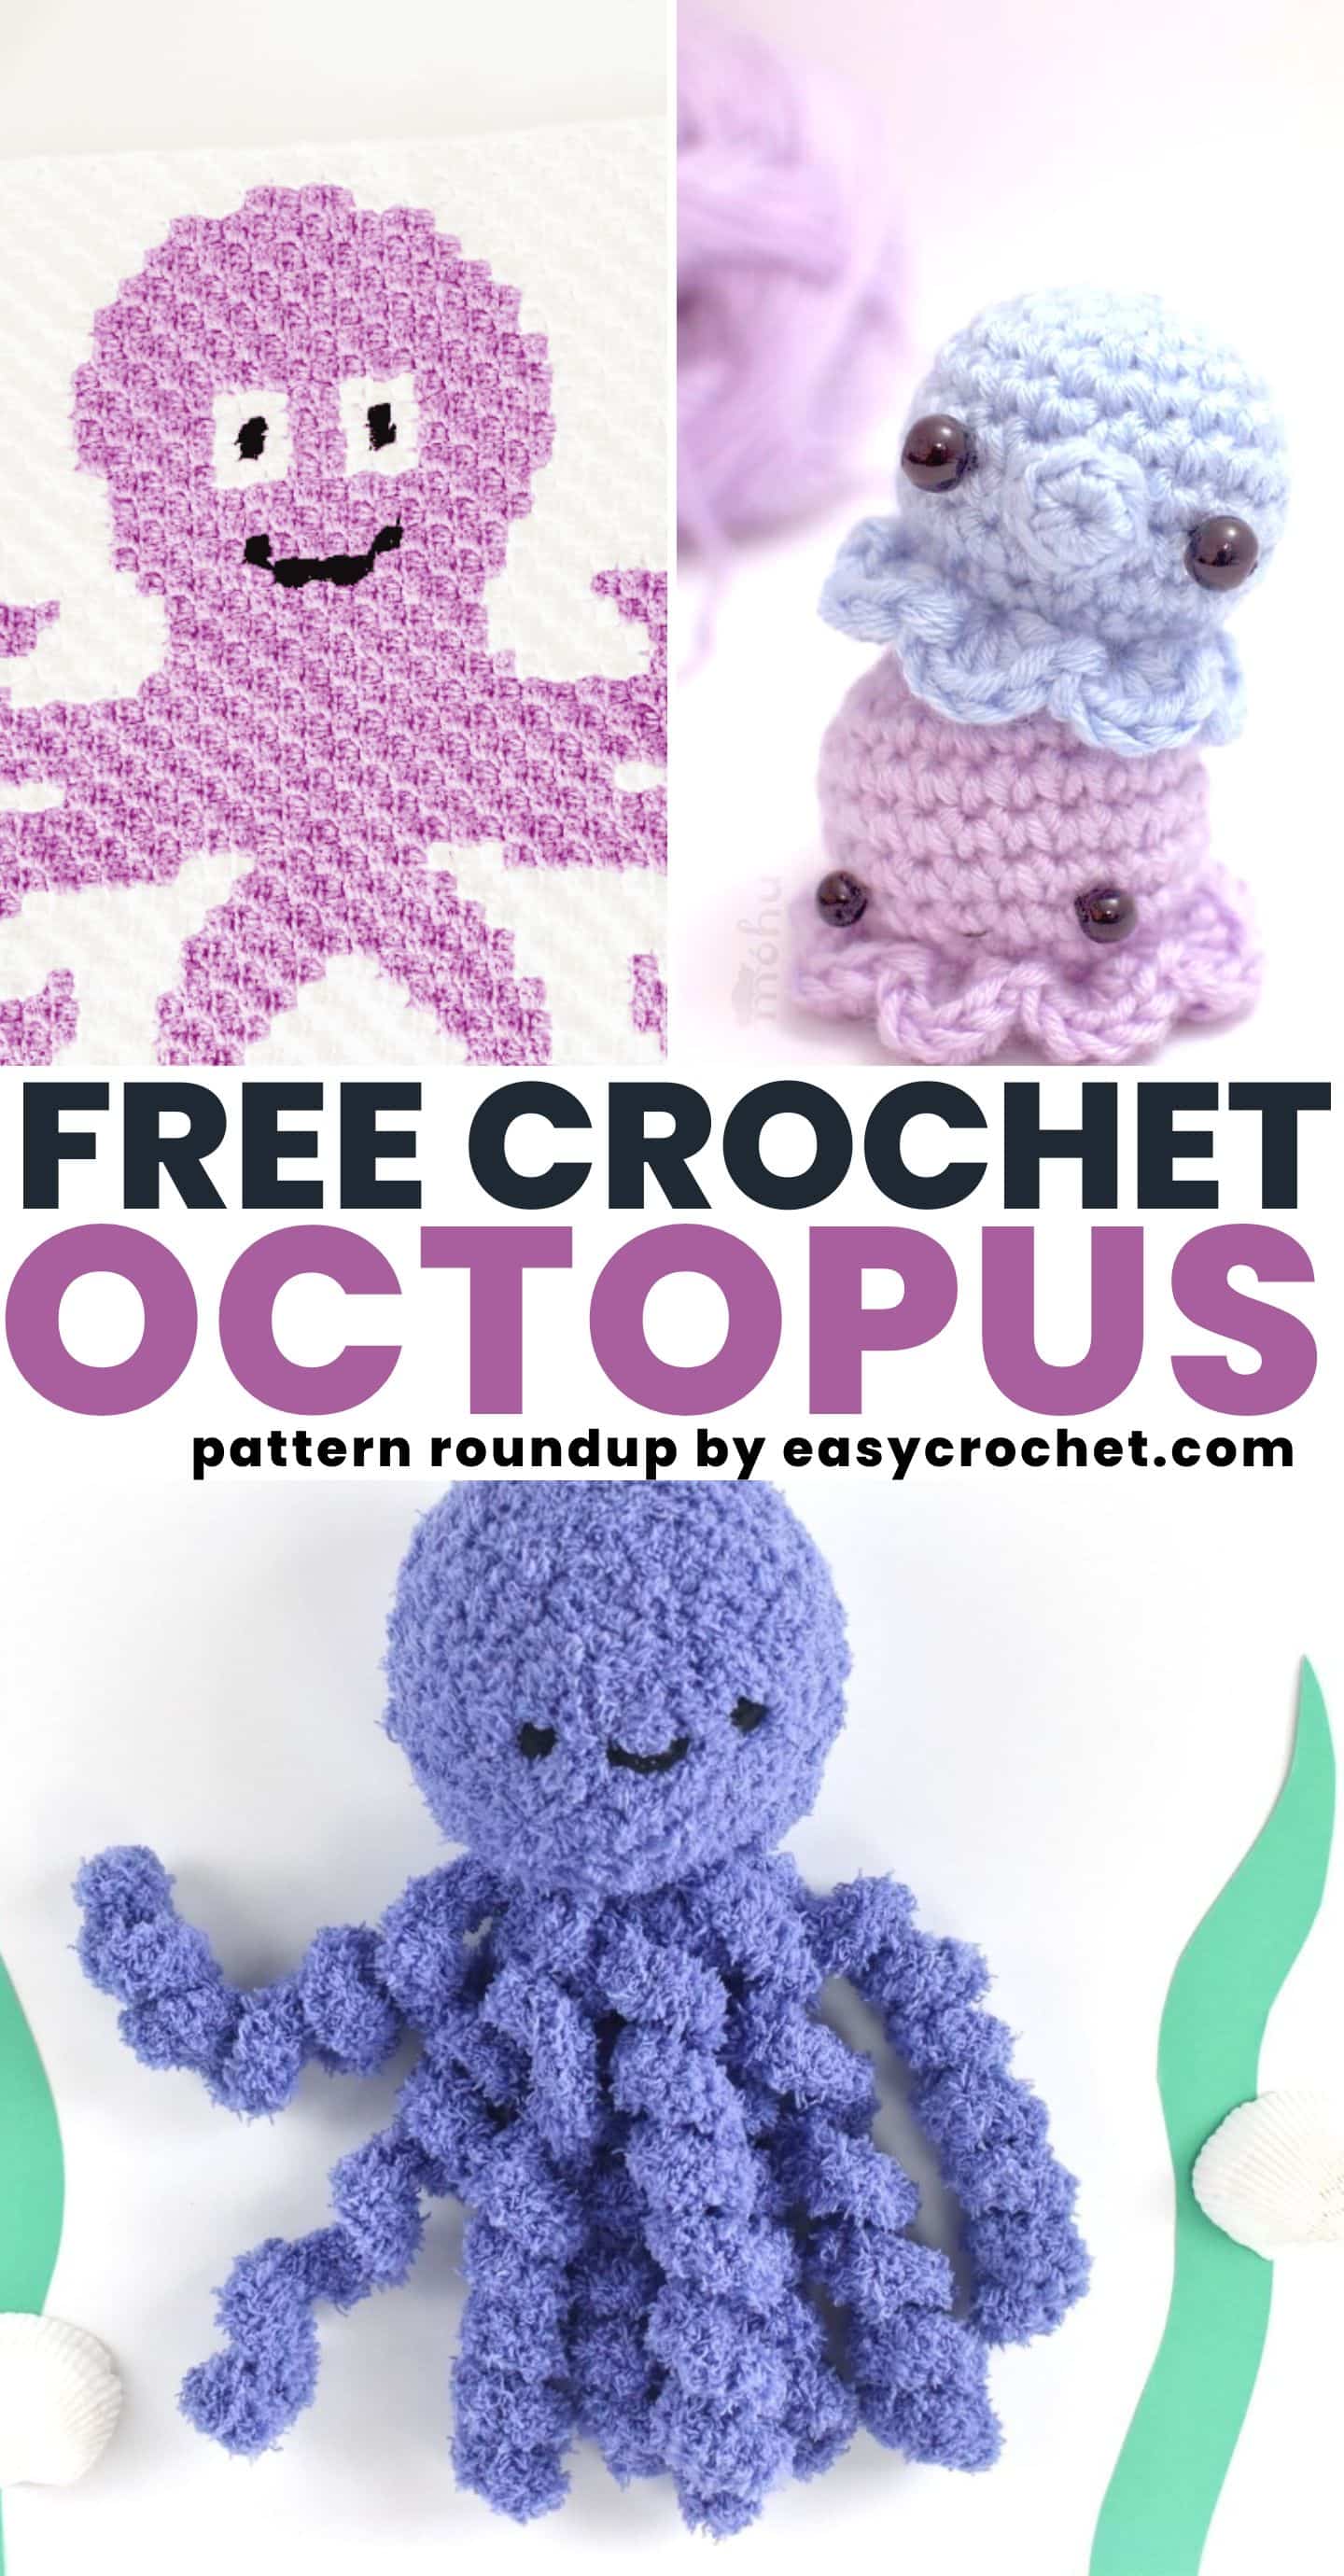 12 Free Crochet Patterns For Stuffed Animals You Can Donate To